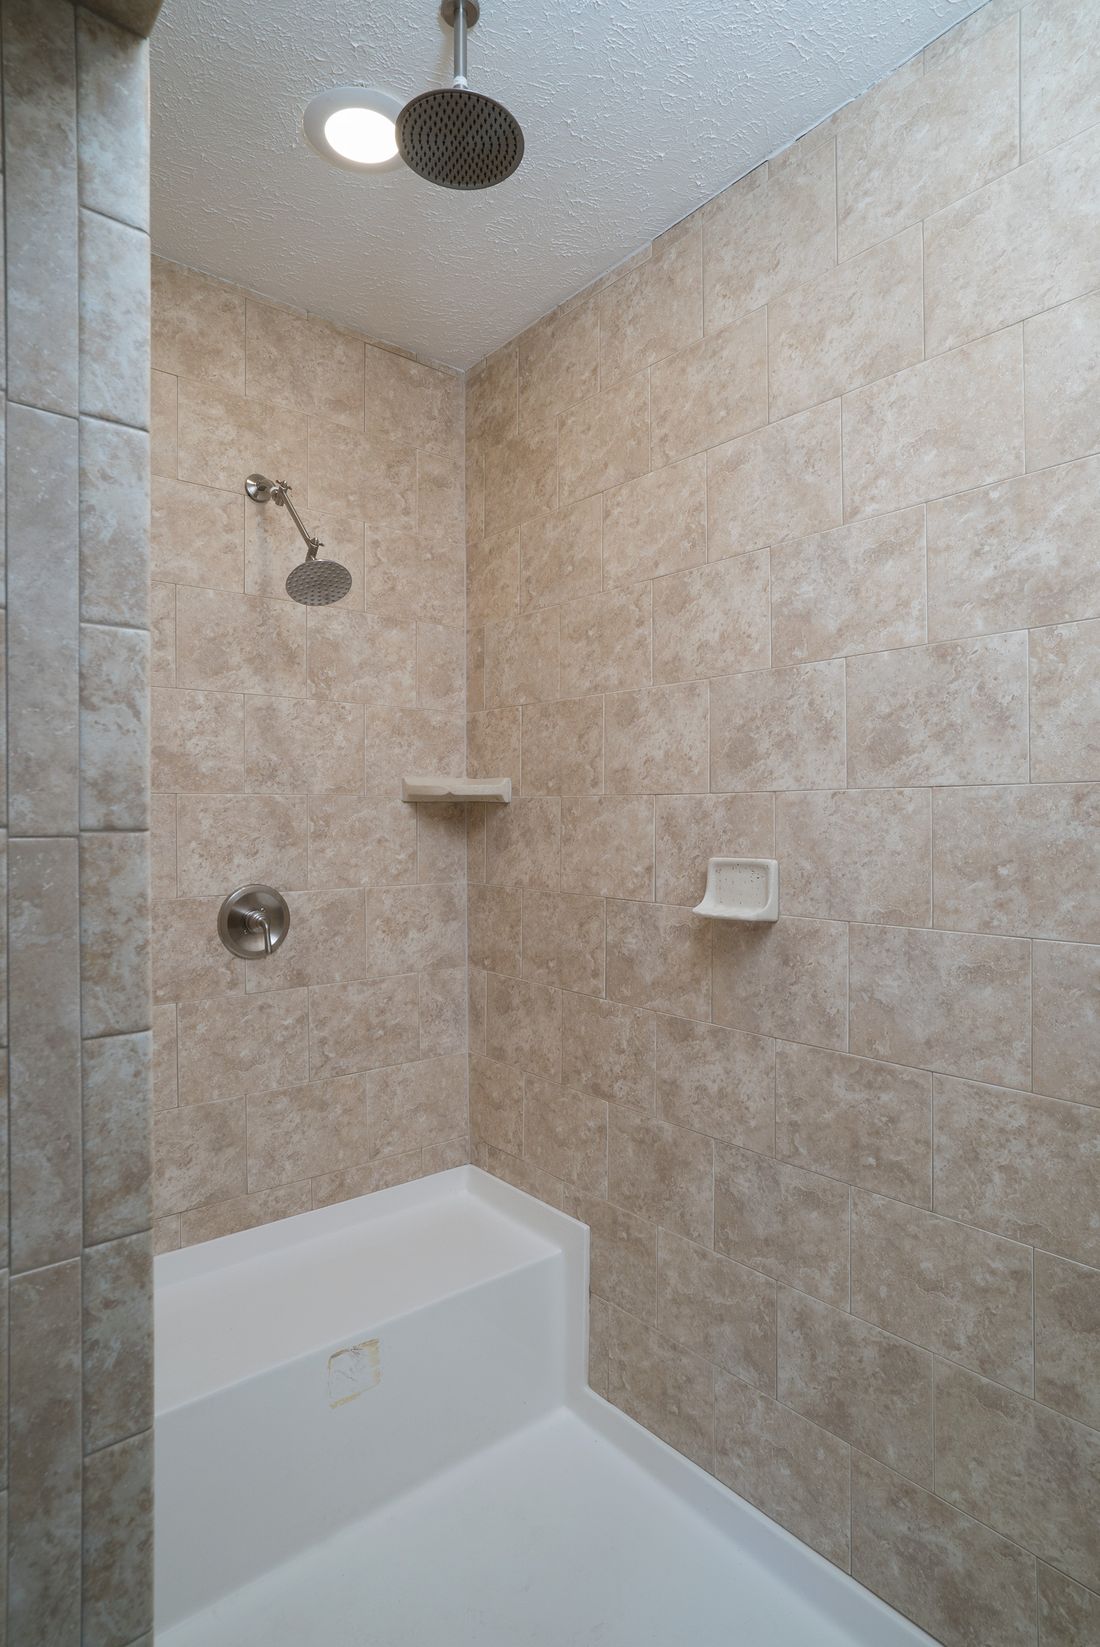 The 1545 JAMESTOWN Primary Bathroom. This Manufactured Home features 3 bedrooms and 2 baths.